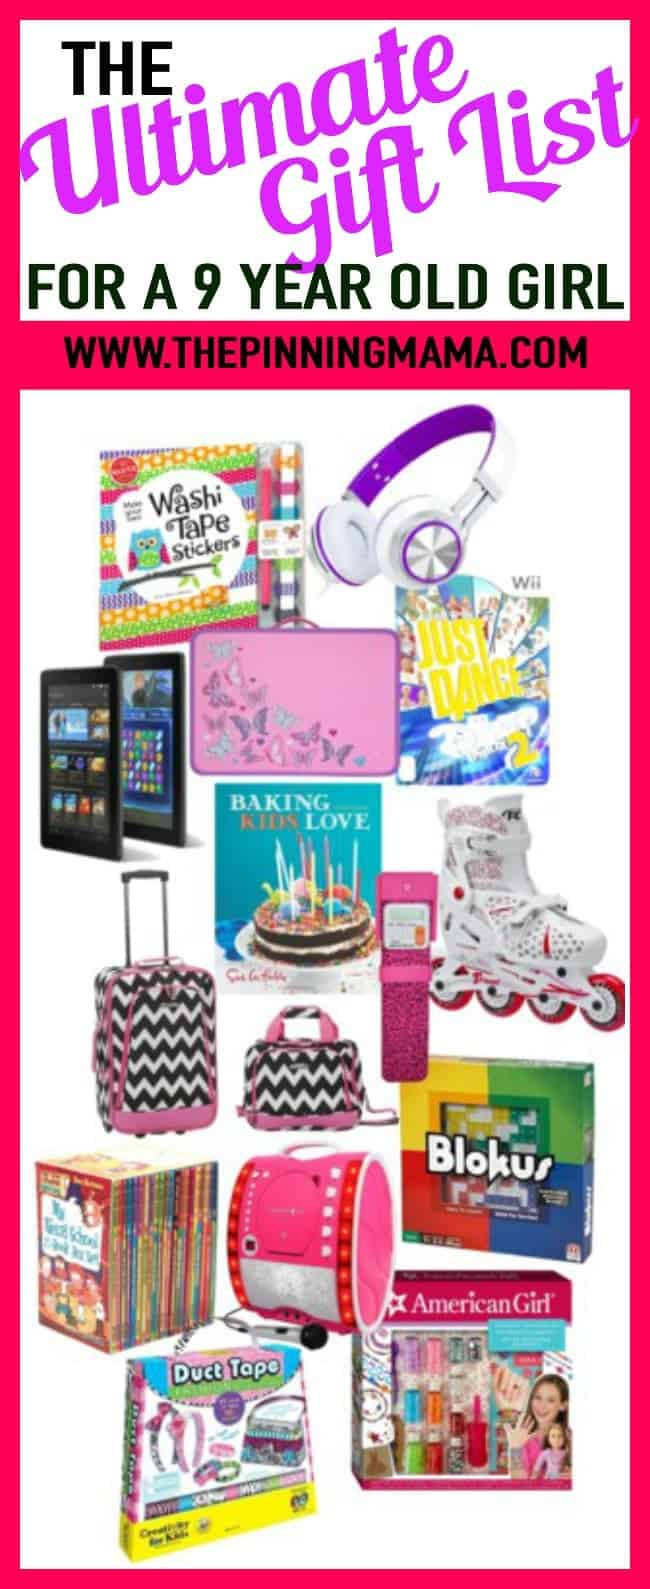 9 Year Old Birthday Gift Ideas
 The Ultimate Gift List for a 9 Year Old Girl • The Pinning